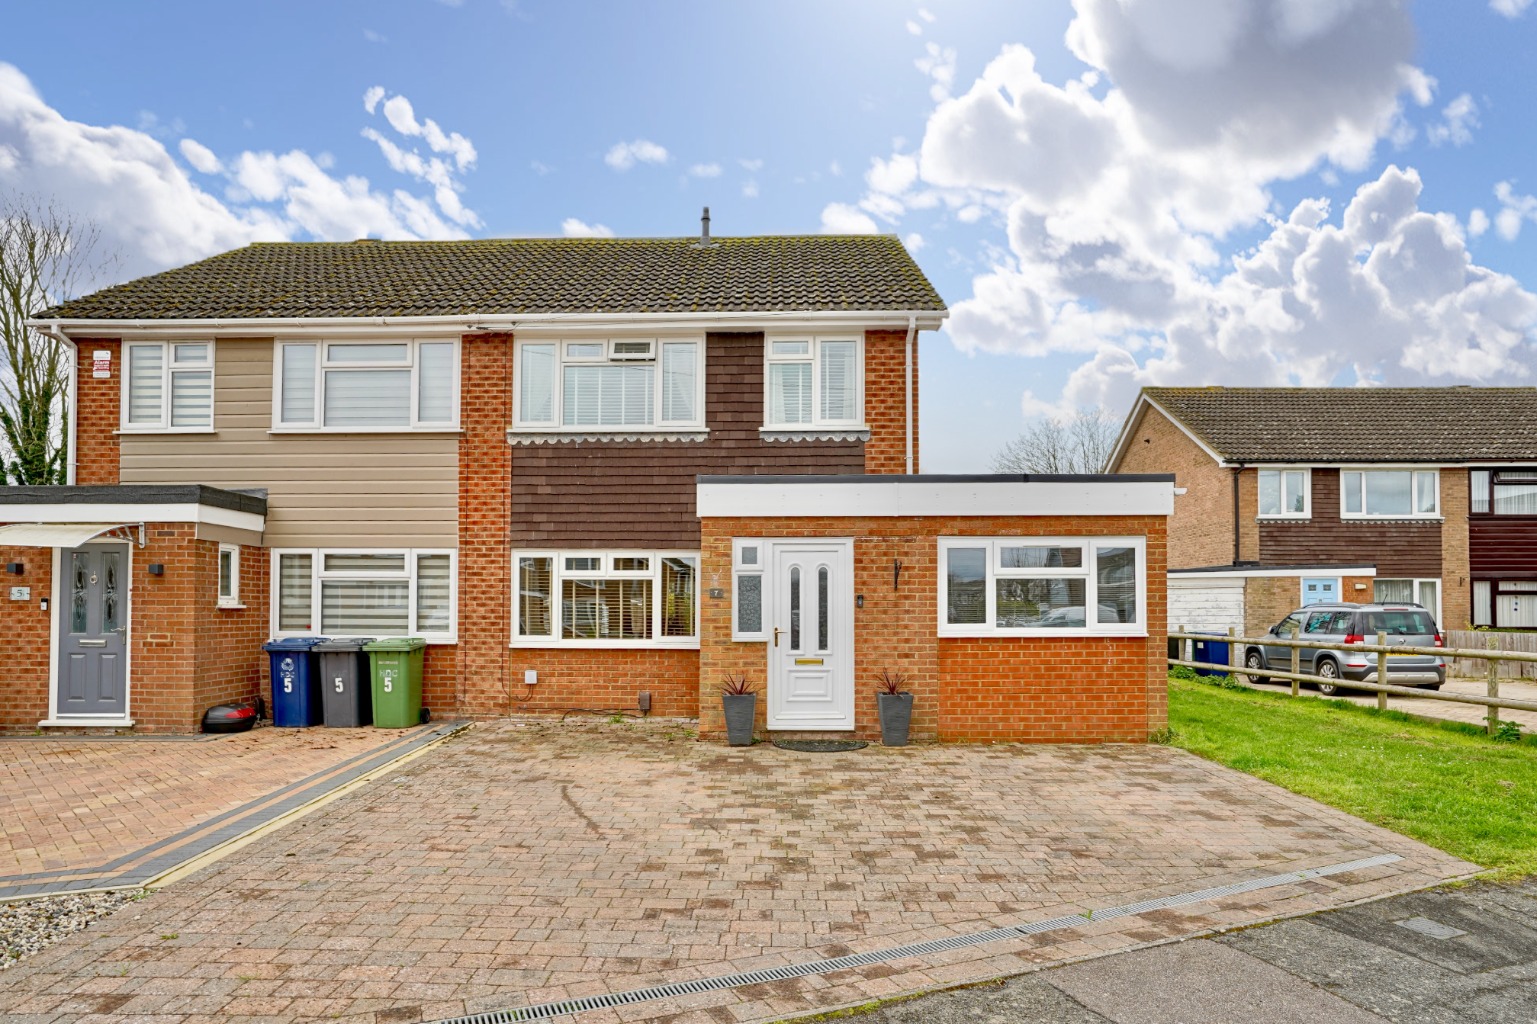 3 bed semi-detached house for sale in Nene Road, St Neots - Property Image 1